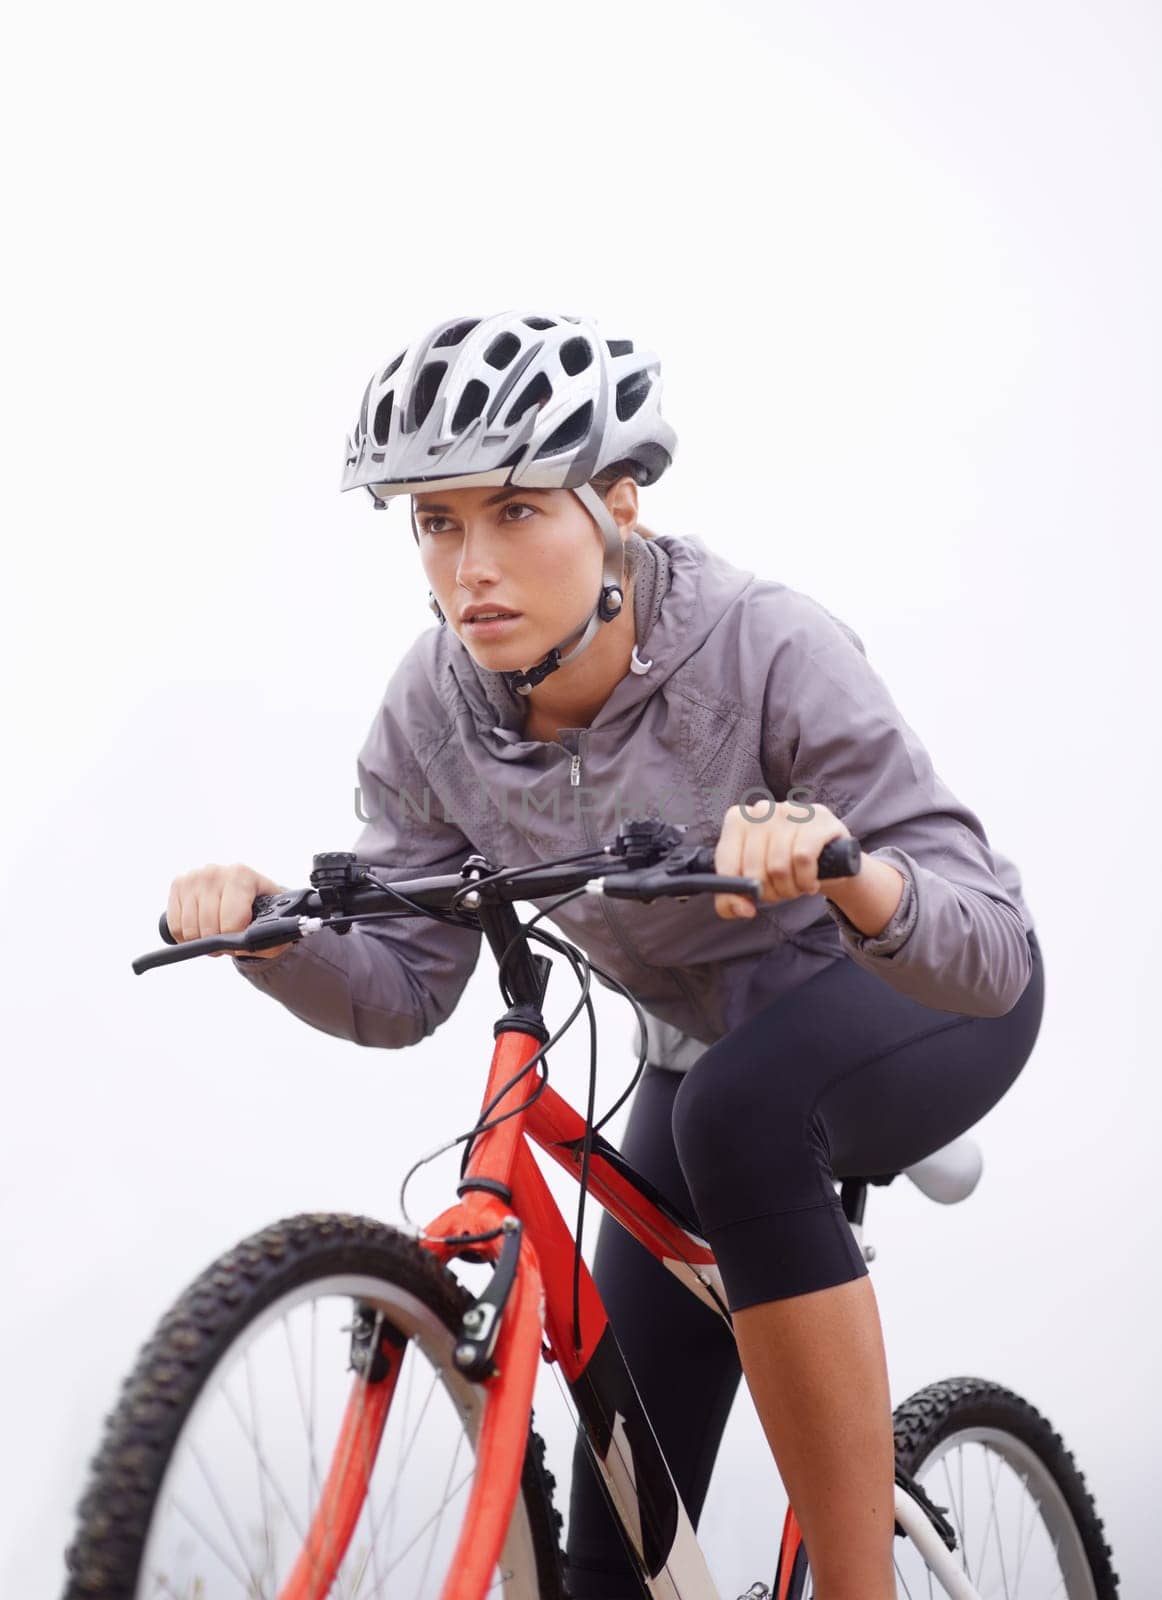 Athlete, bike and nature with ride, speed and fitness for health and wellness or workout. Woman, cycling and exercise for training, transportation and adventure with helmet and cardio or perseverance.